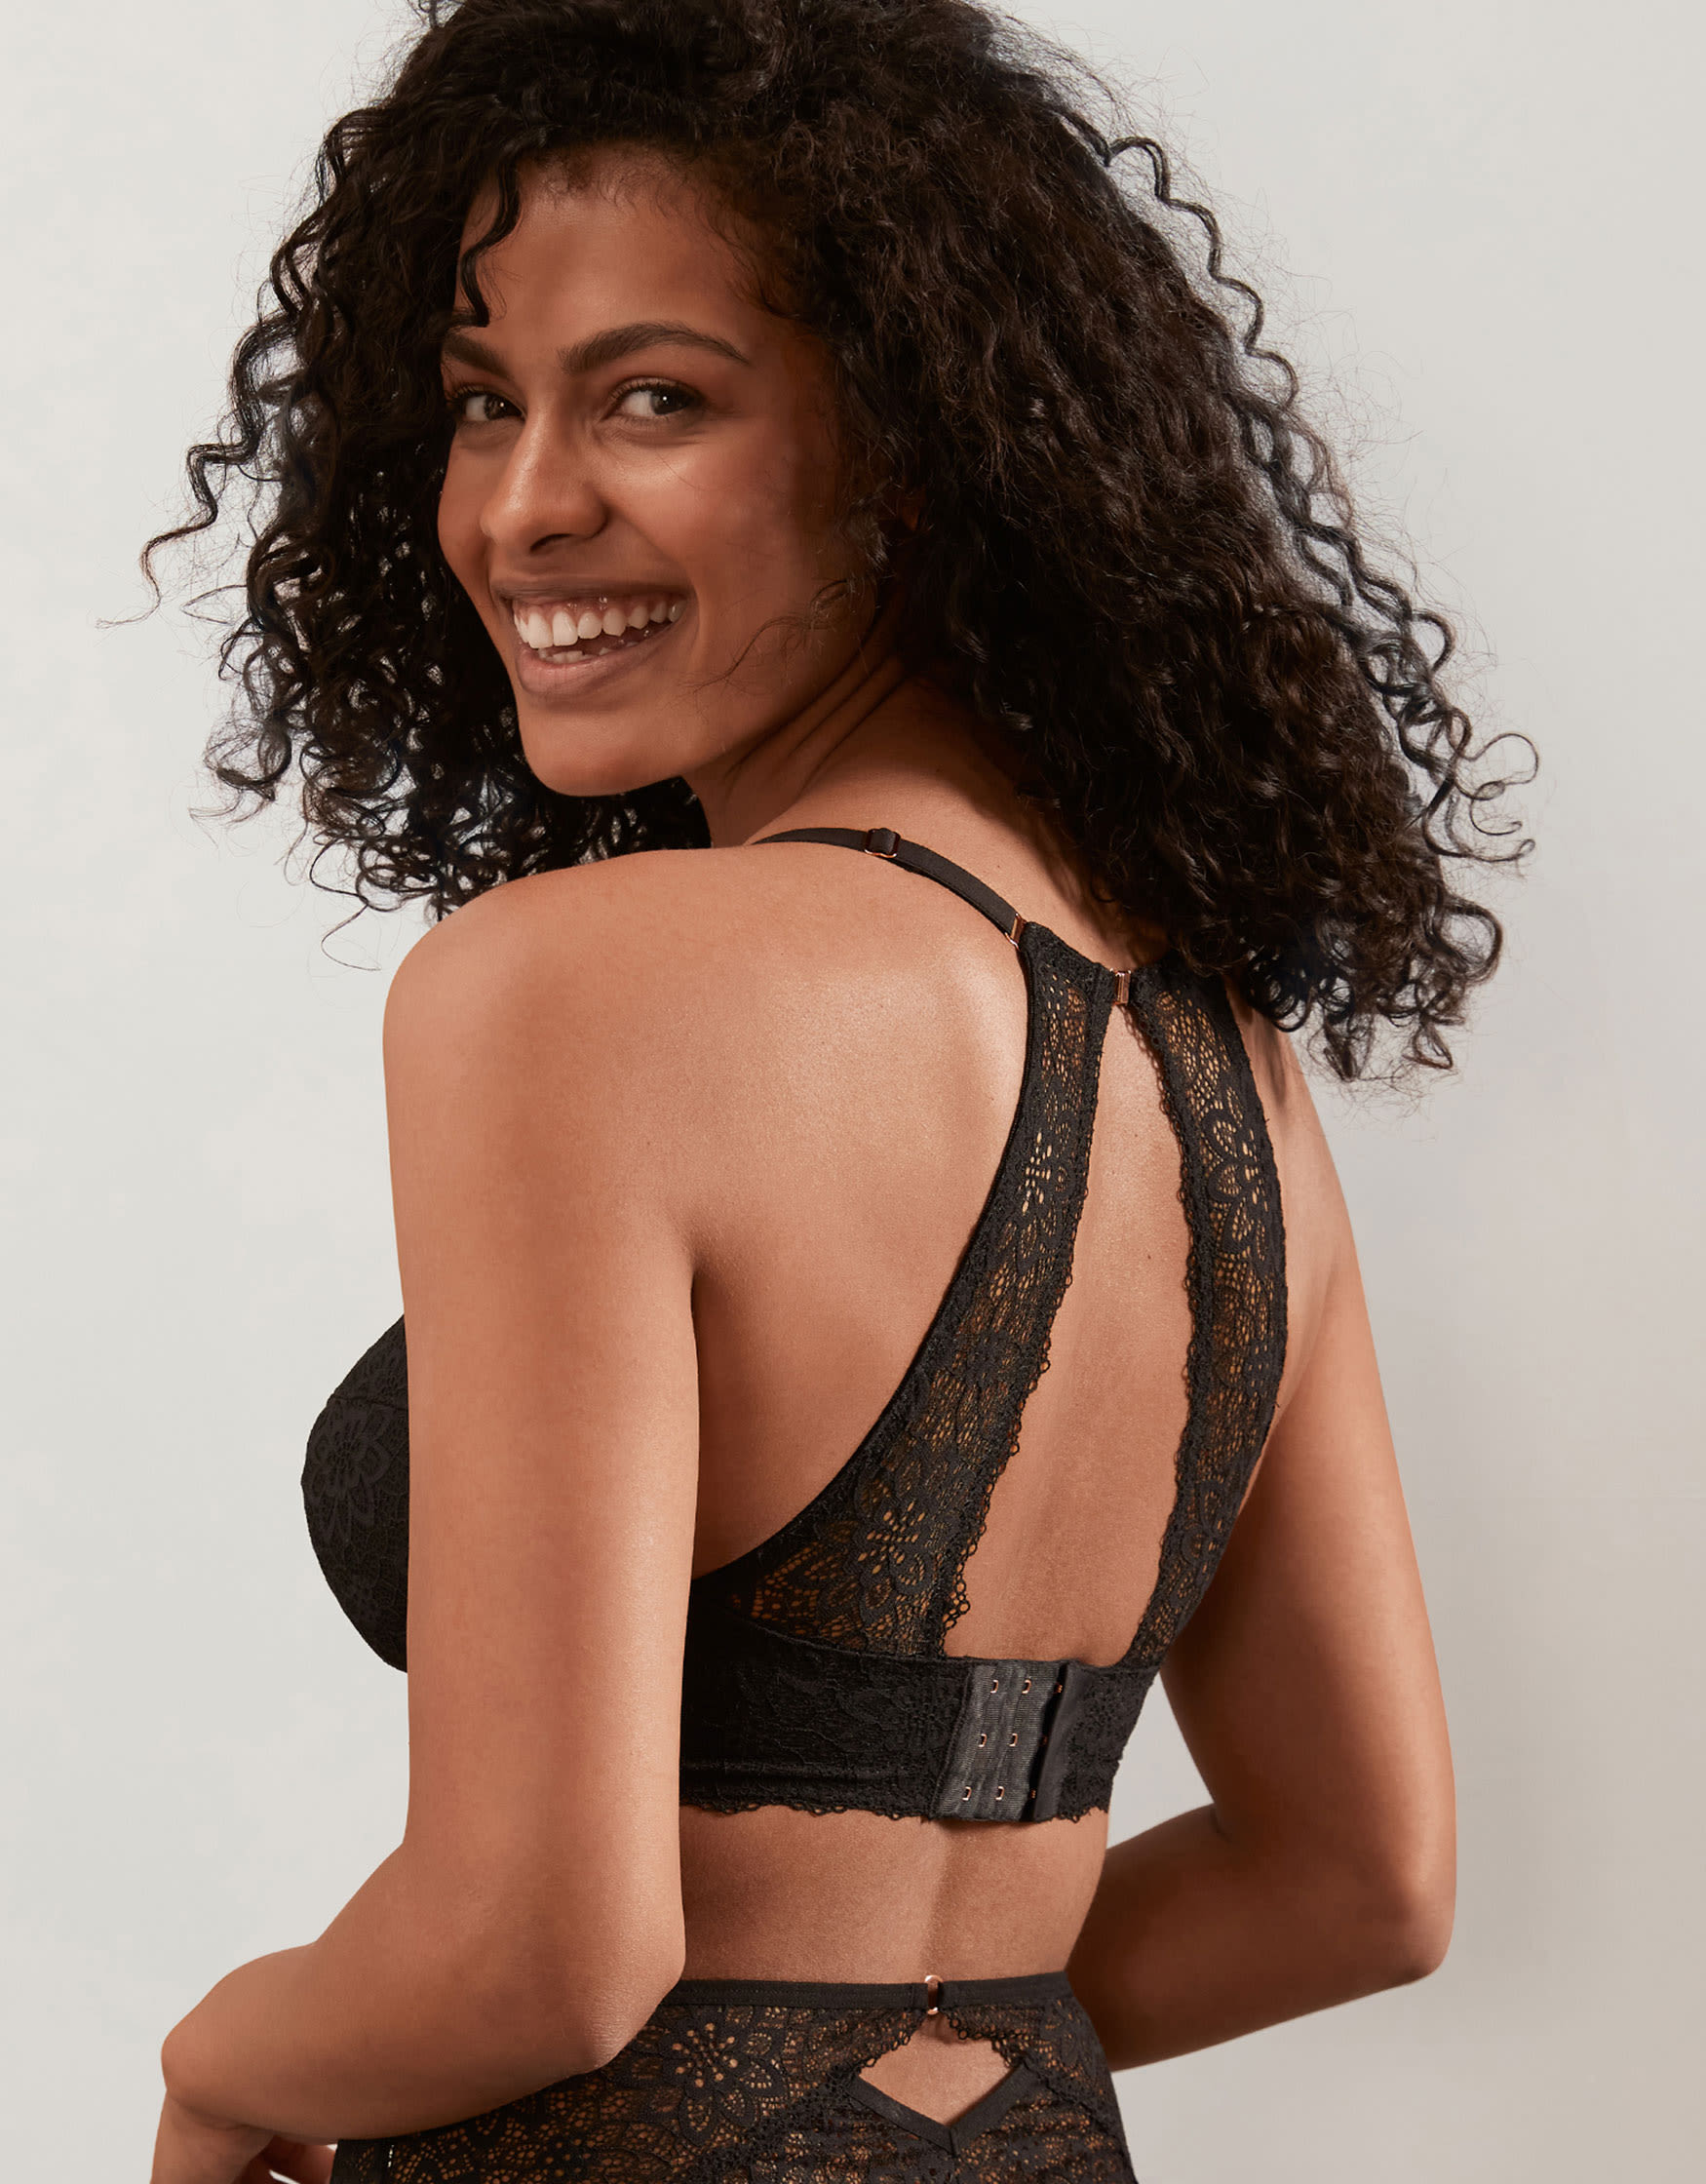 Everyday Lace Full Coverage Bralette Black - Full Coverage Lace Bralette  With Support